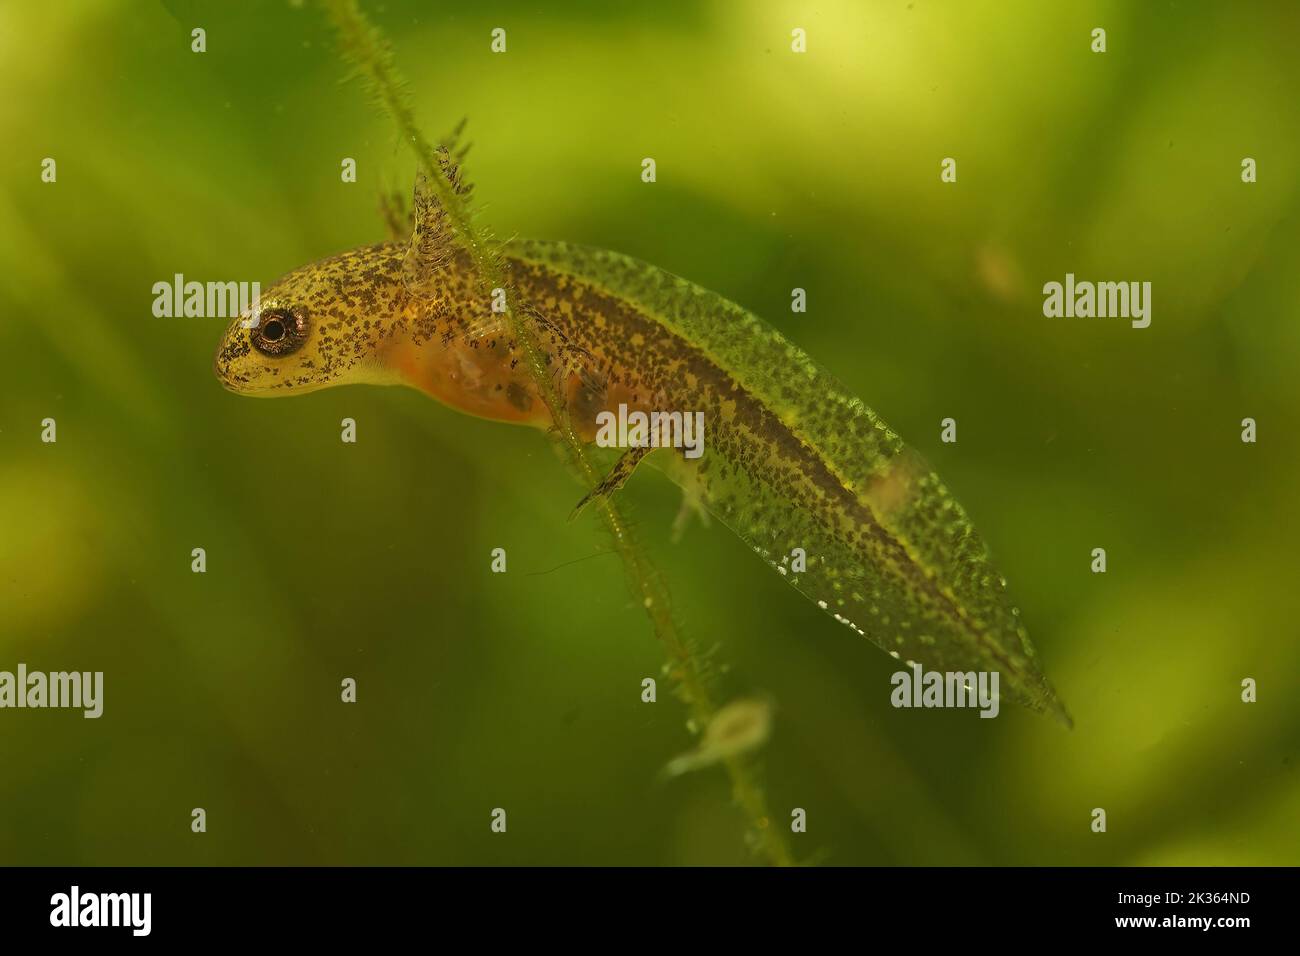 Closeup on an aquatic larvae with gills of the Carpathian newt, Lissotriton montandoni in green waterweeds Stock Photo